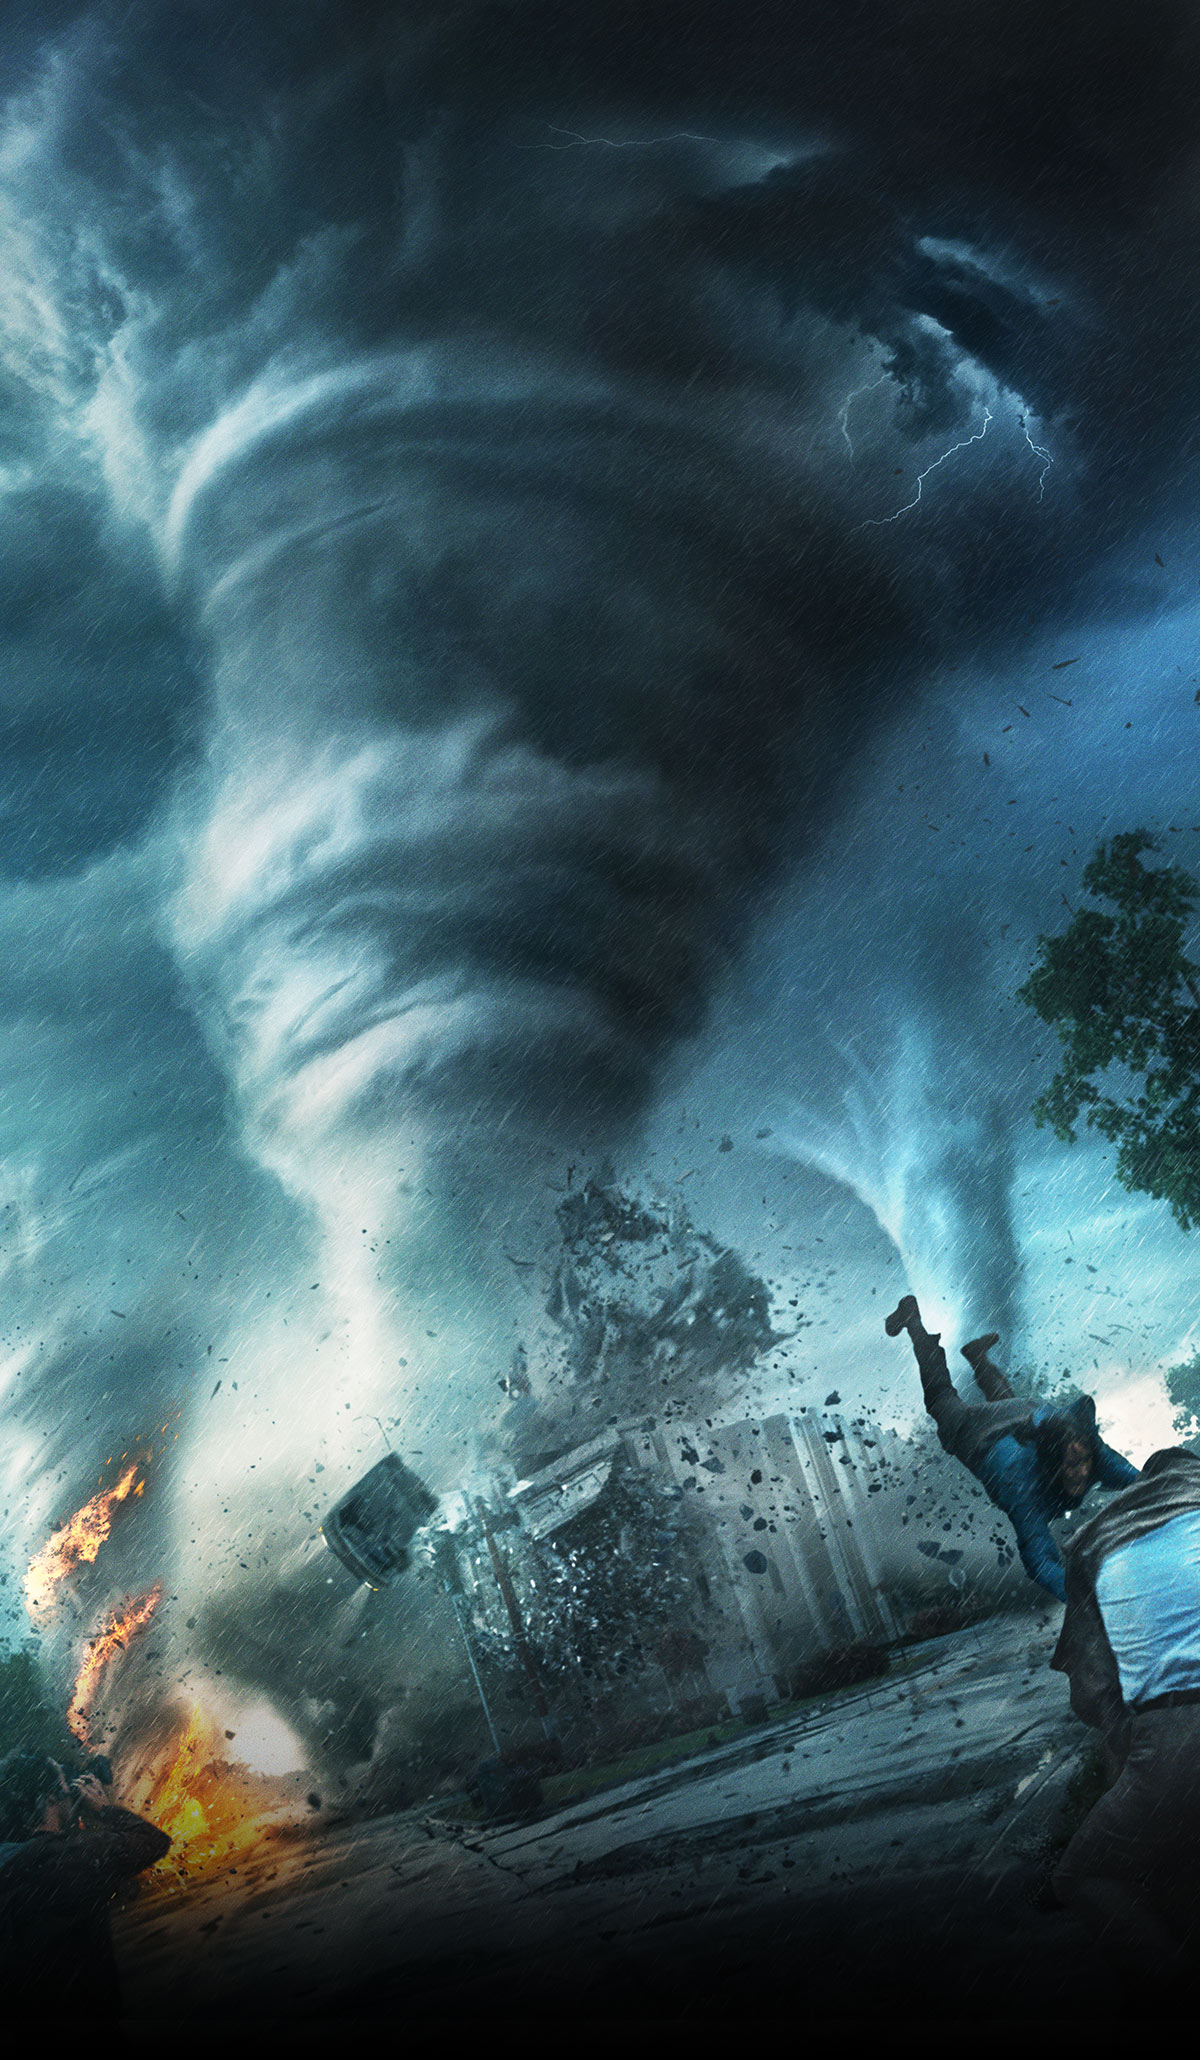 Into The Storm Pics, Movie Collection